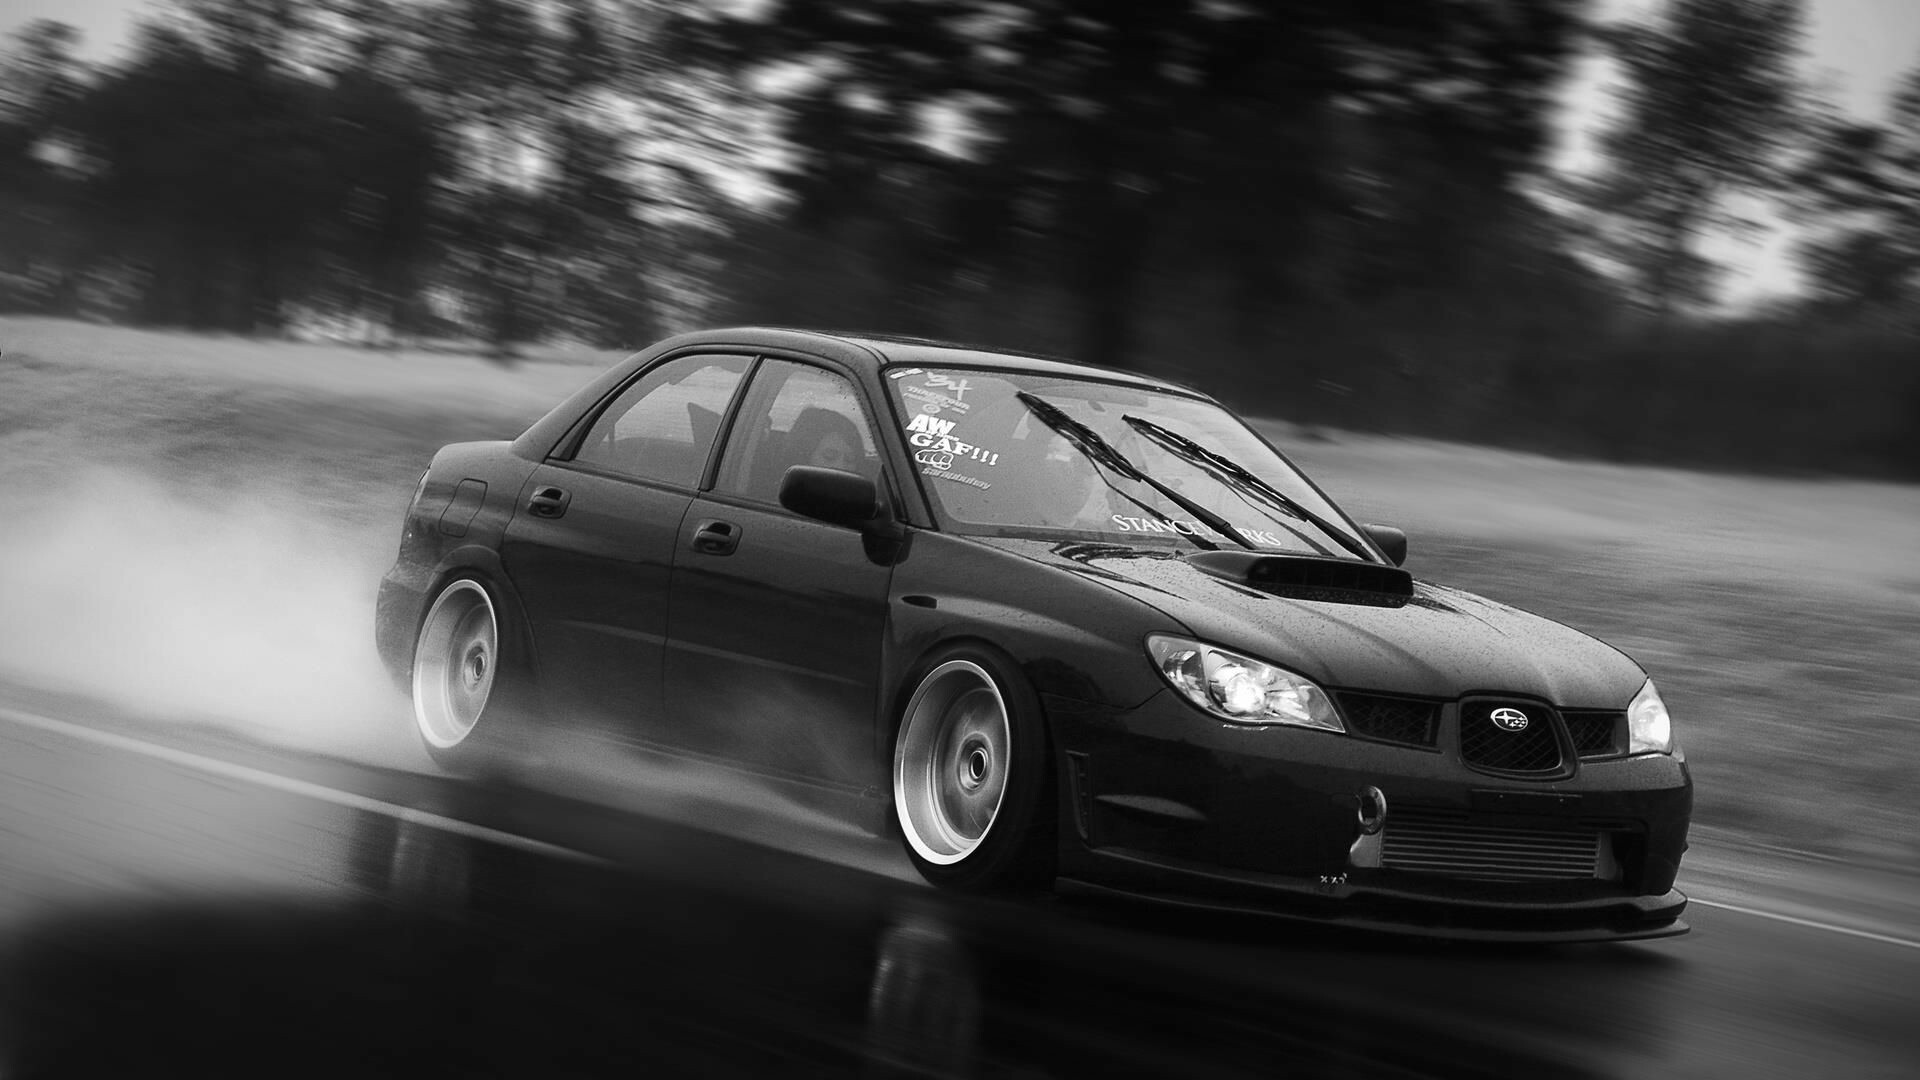 Subaru: Well-regarded for their offbeat combination of boxer engines and all-wheel drive, the Japanese brand's popularity has been on the rise for many years. 1920x1080 Full HD Background.